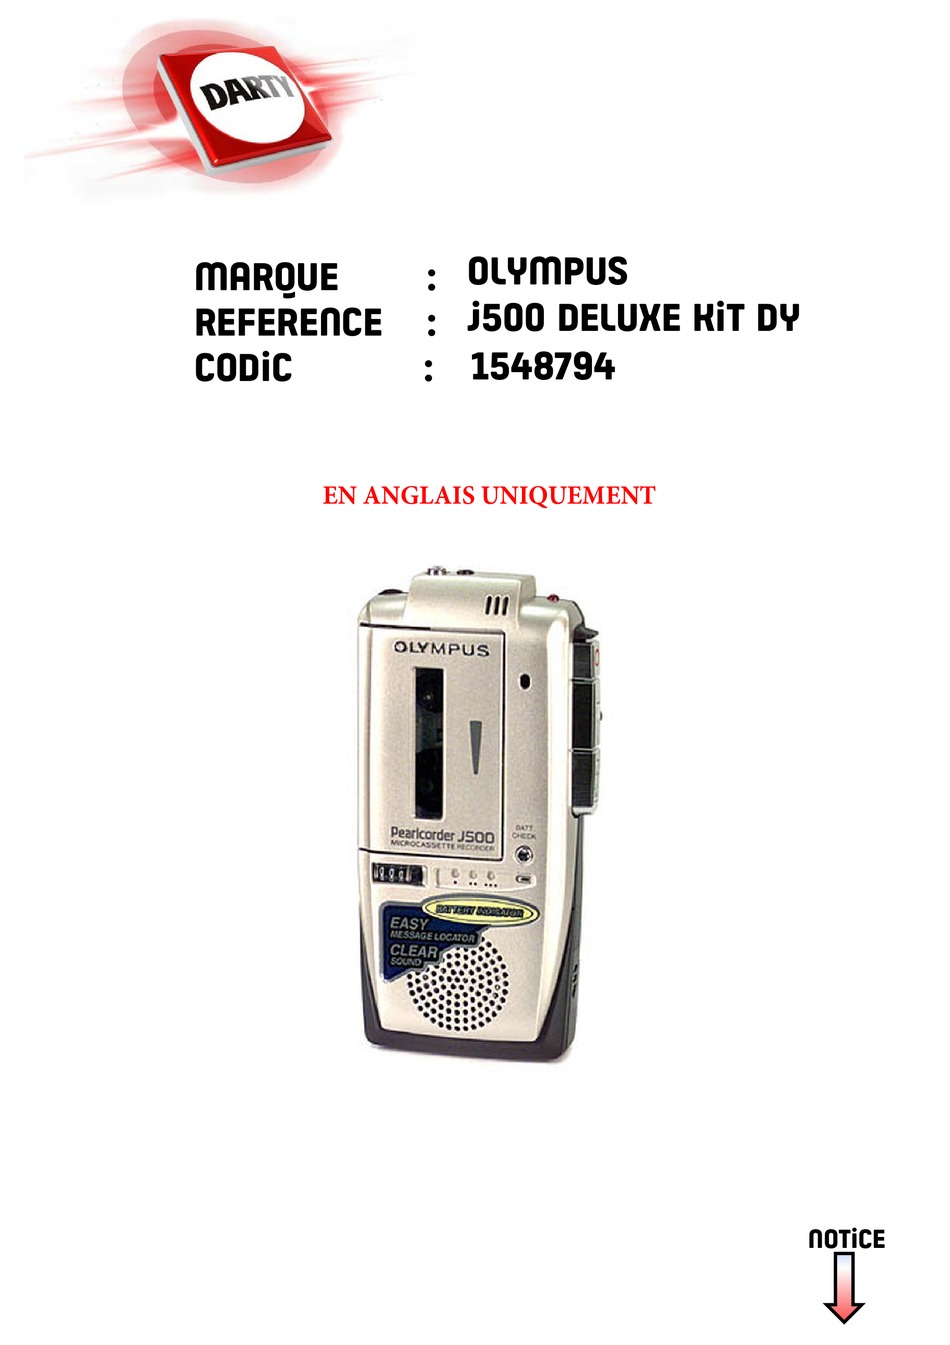 OLY141540 Olympus Pearlcorder J500 Voice-Activated Dual Tape Speed Microcassette Recorder 